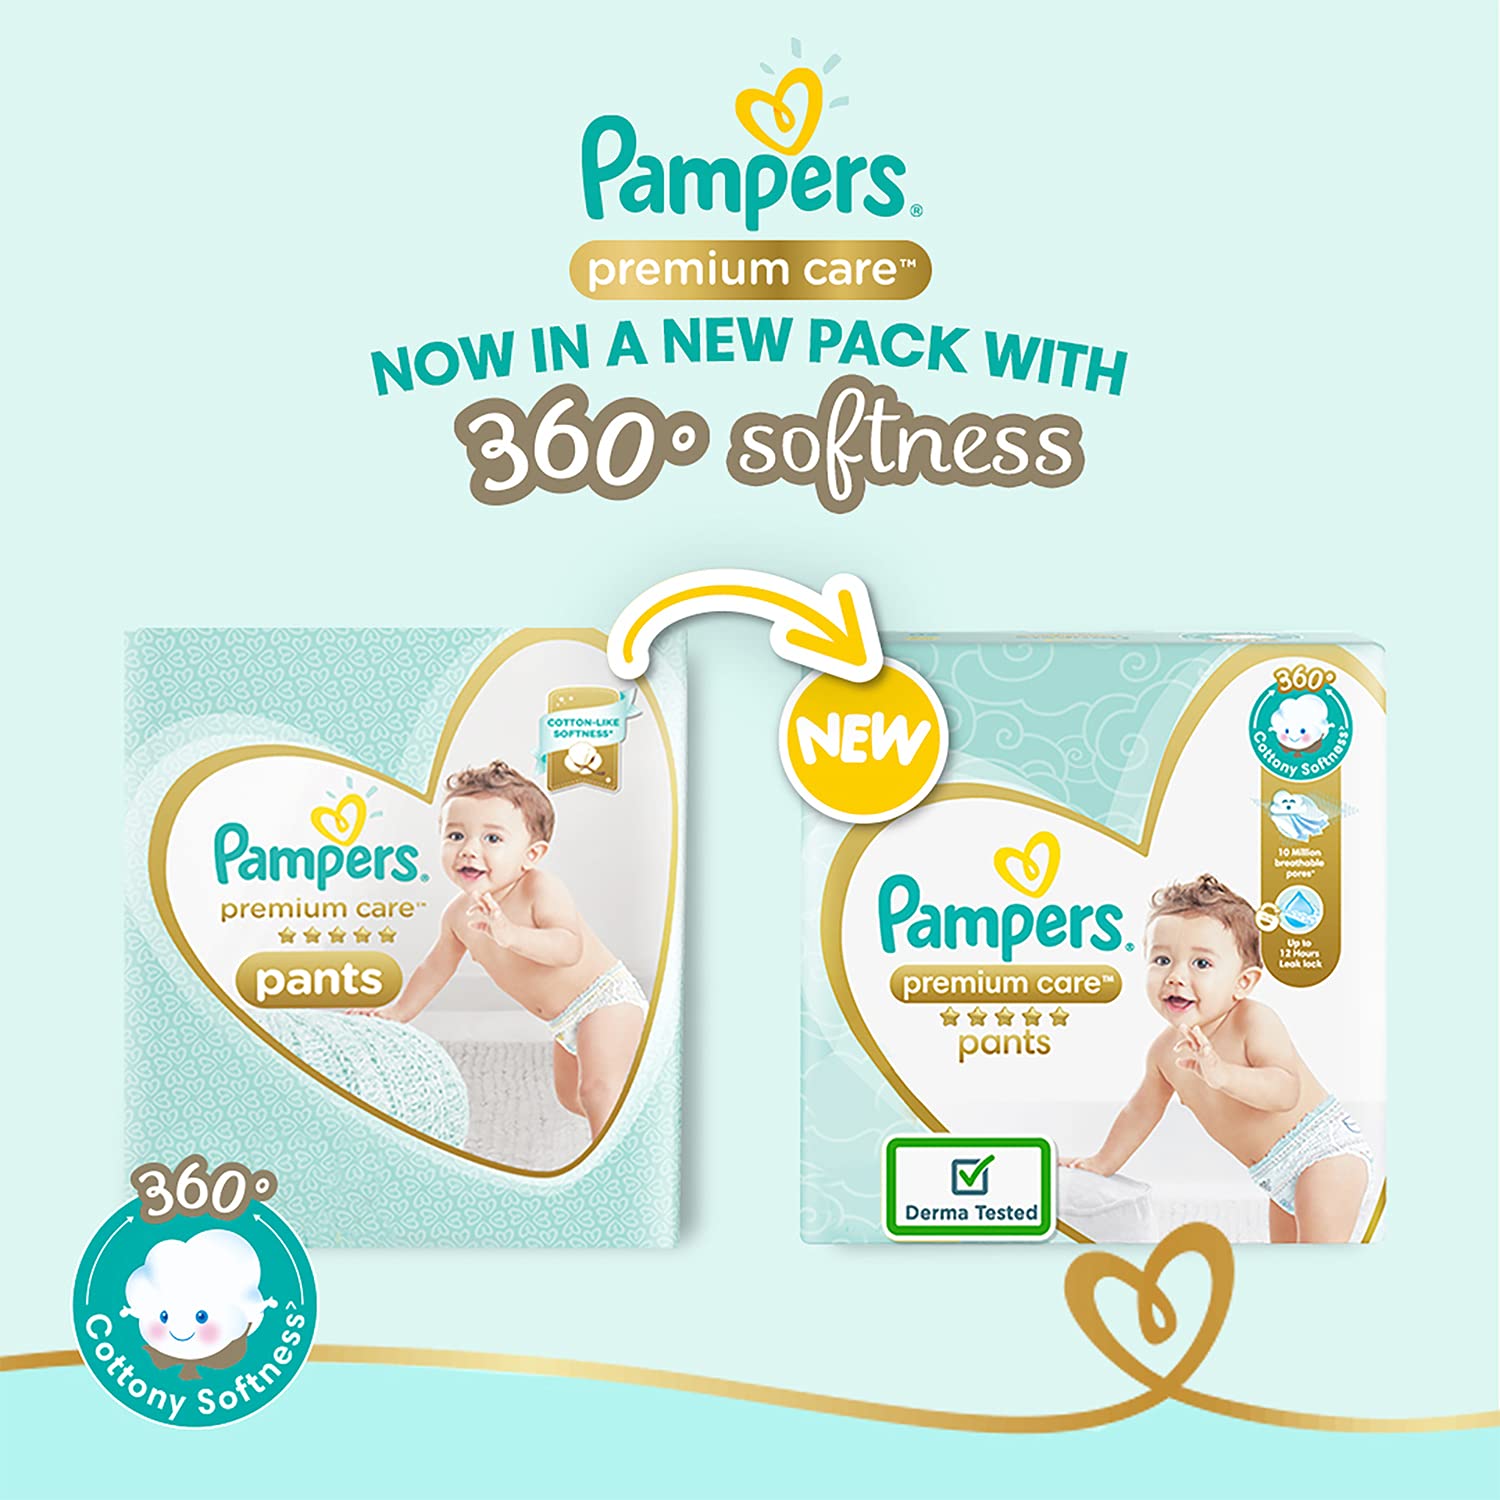 Pampers Premium Care Pants, Extra Large size baby diapers (XL), 108 Count, Softest ever Pampers pants